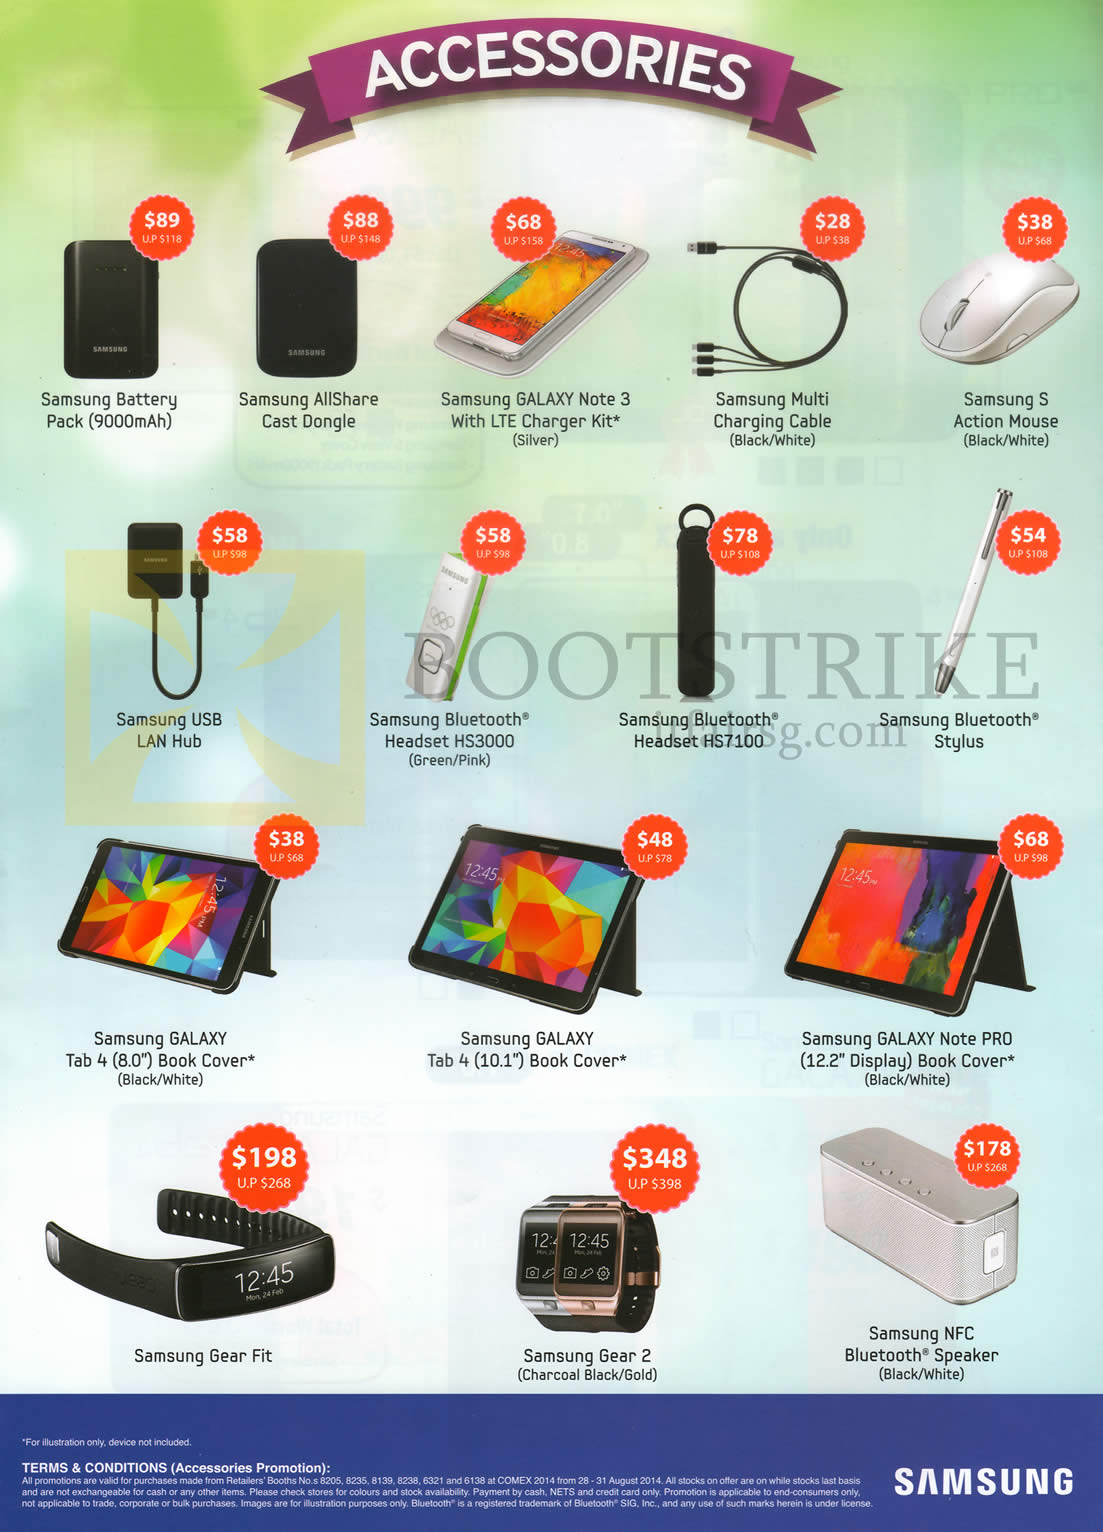 COMEX 2014 price list image brochure of Samsung Accessories Battery Pack, Dongle, Charger Kit, Mouse, Stylus, Headset, LAN Hub, Book Cover, Gear Fit, Bluetooth Speaker